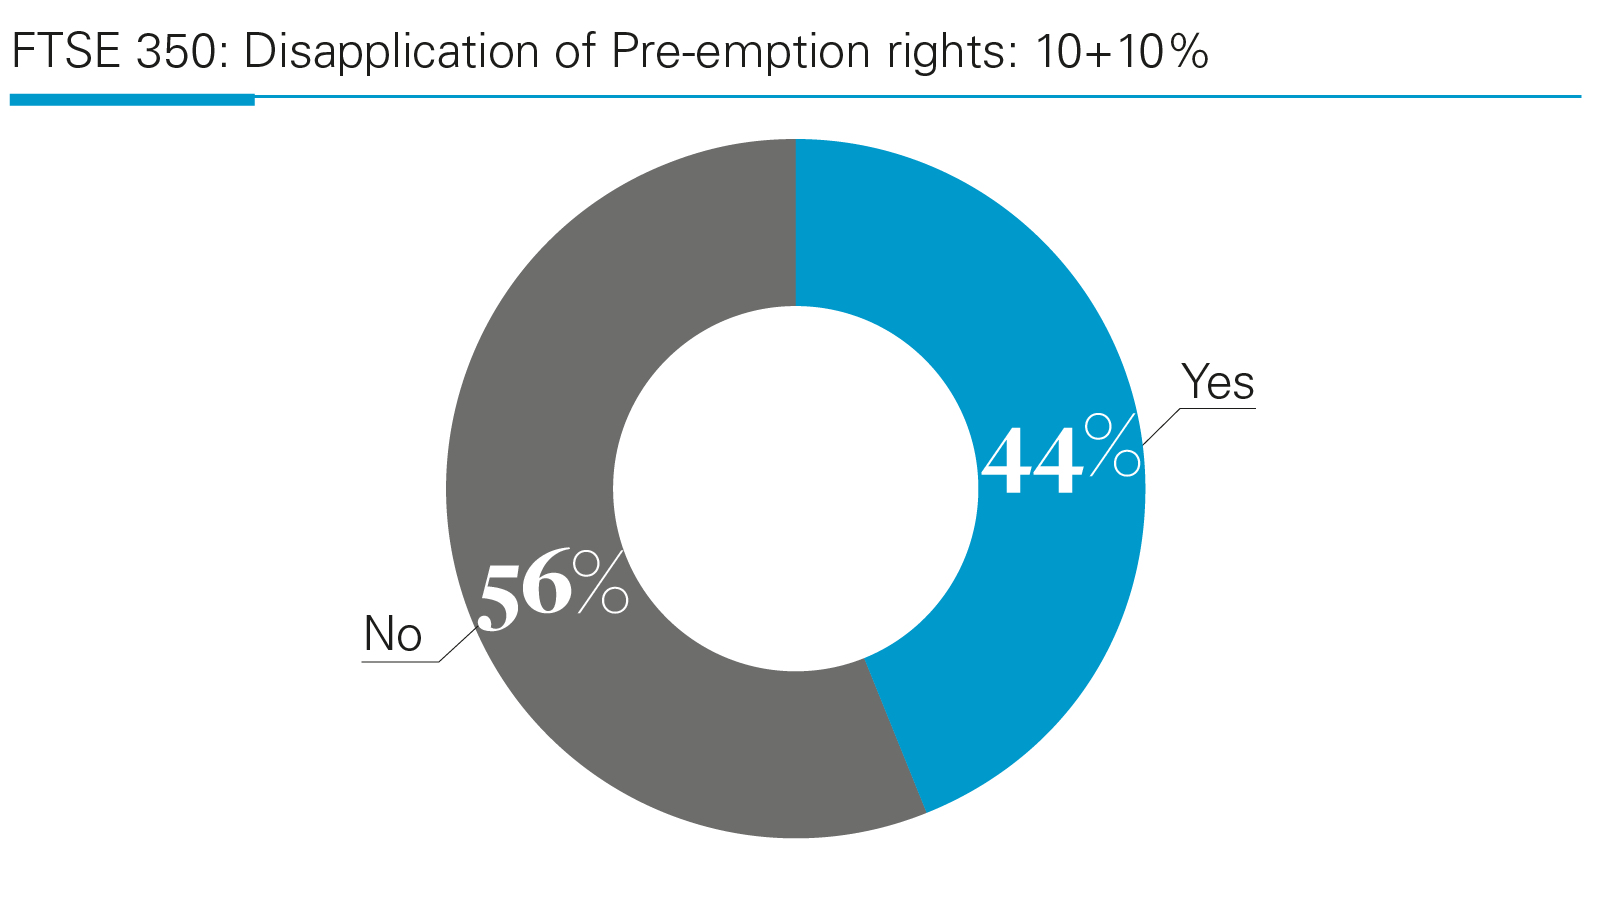 FTSE 350: Disapplication of Pre-emption rights: 10+10%